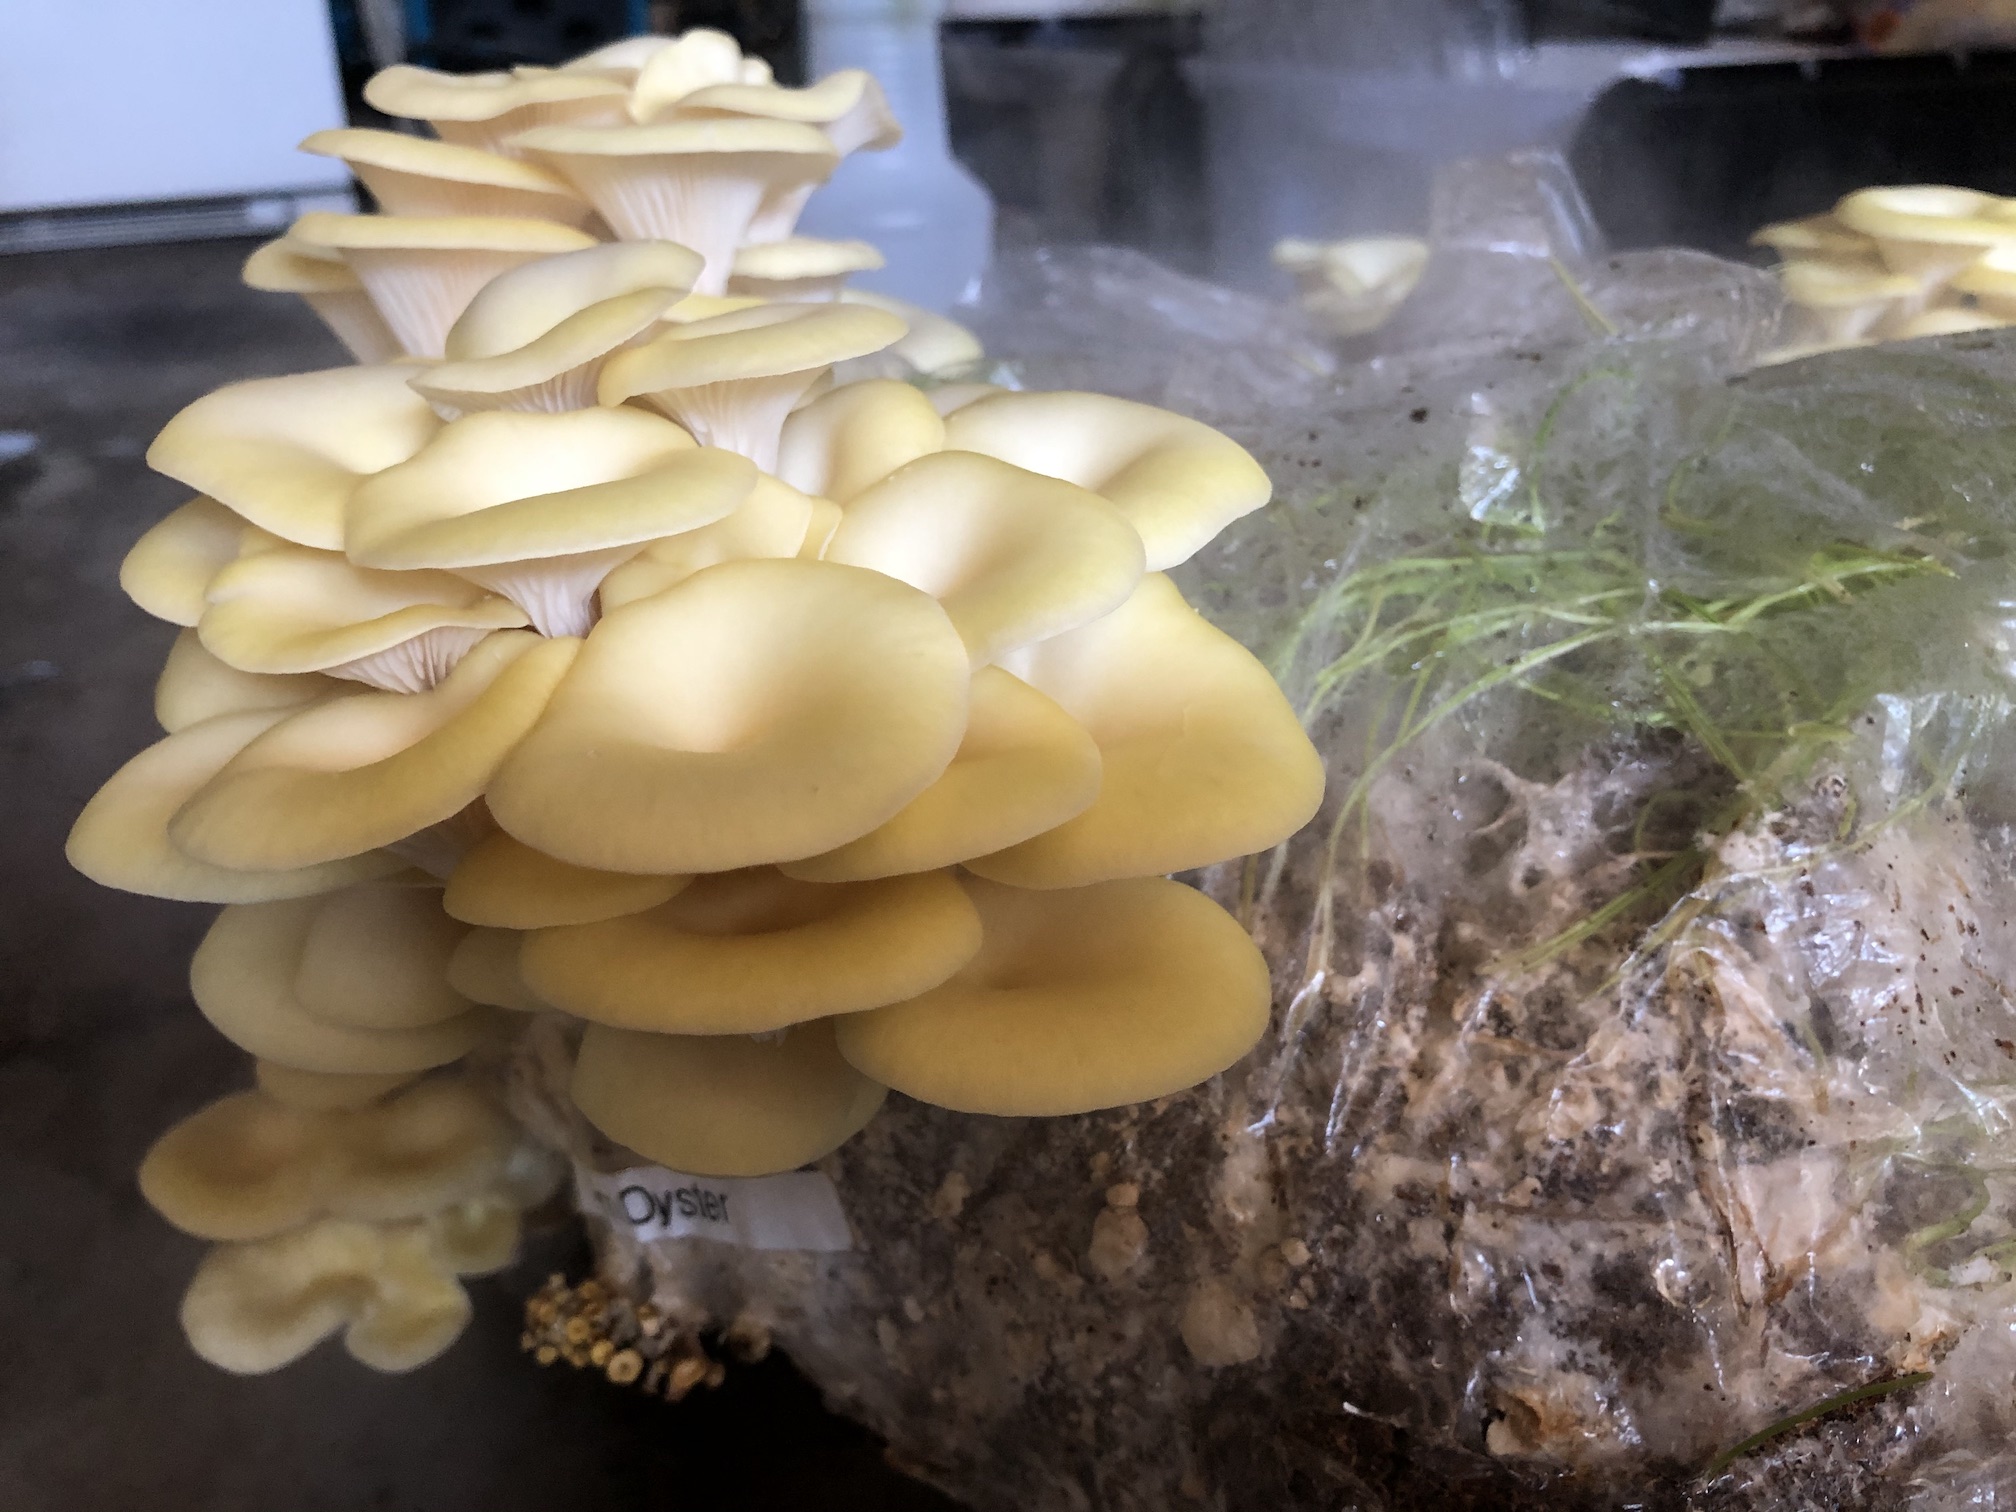 Oyster Mushrooms @ Home